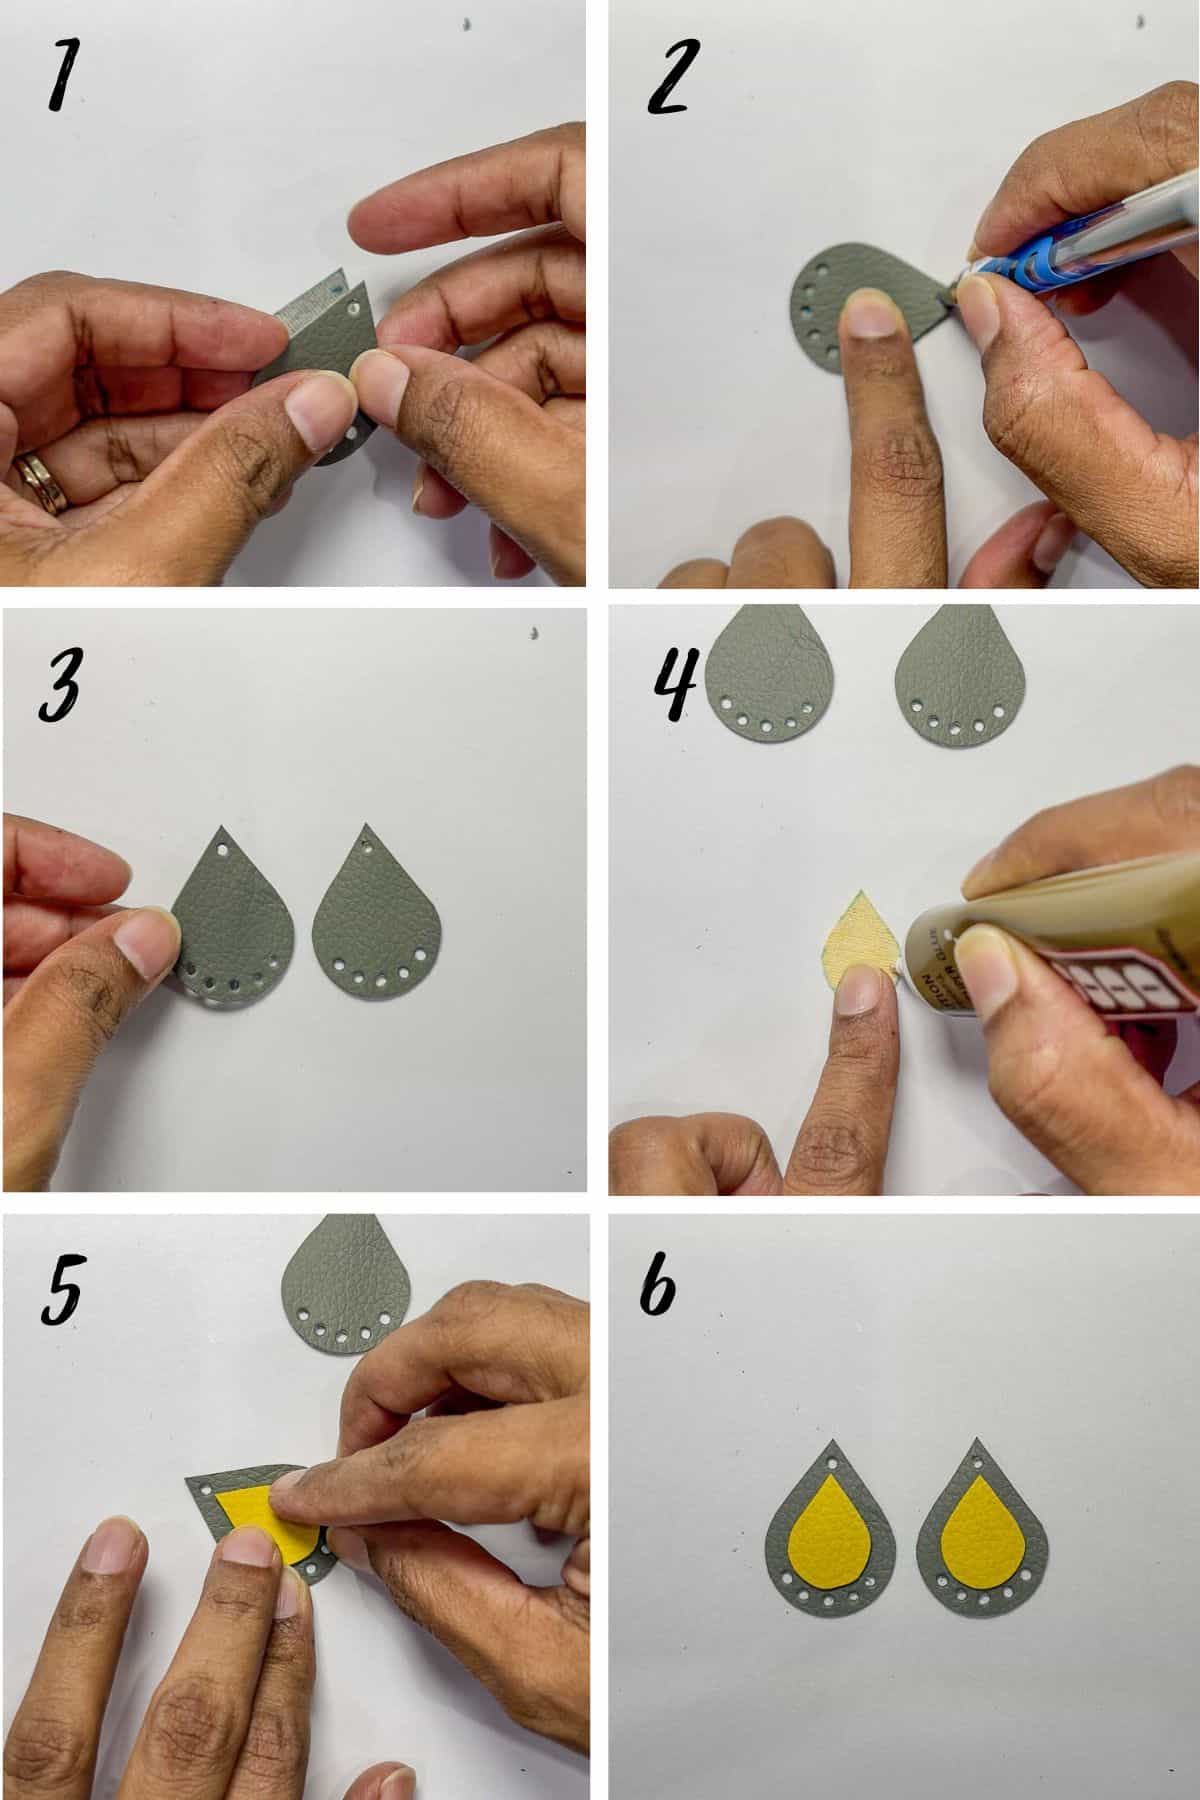 A poster of 6 images showing how to stick leather to make earrings.